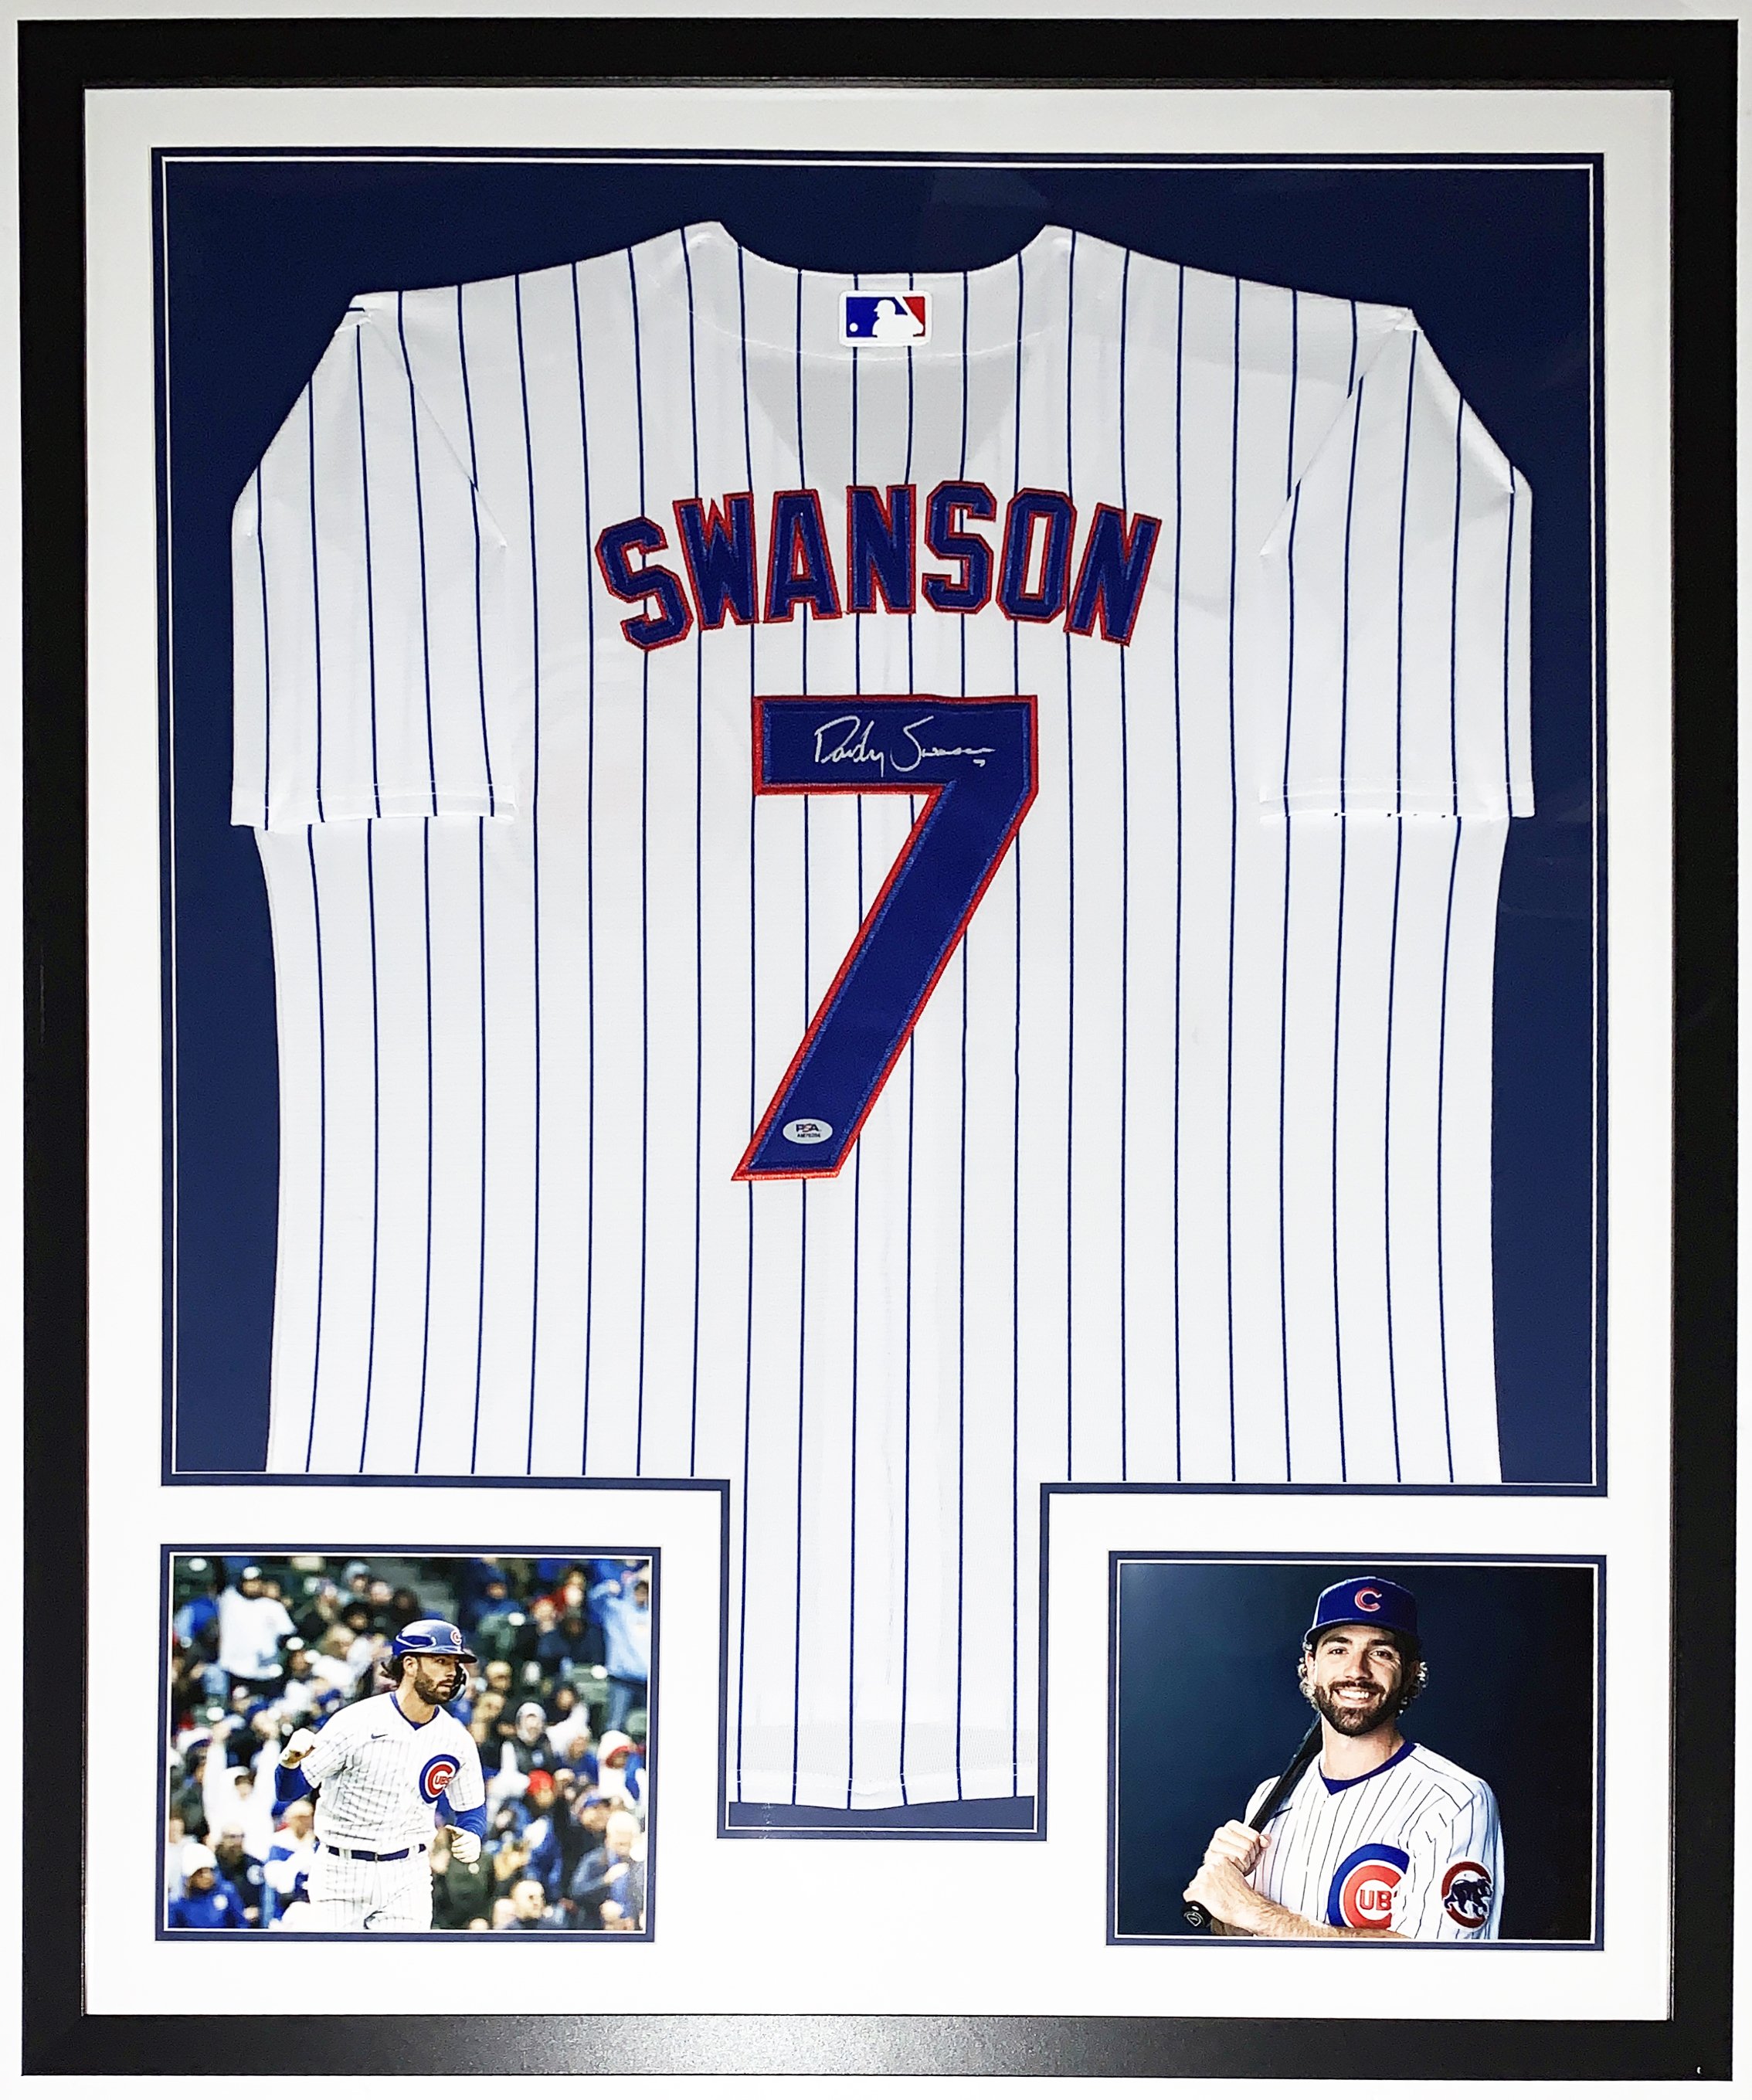 cubs dansby swanson jersey